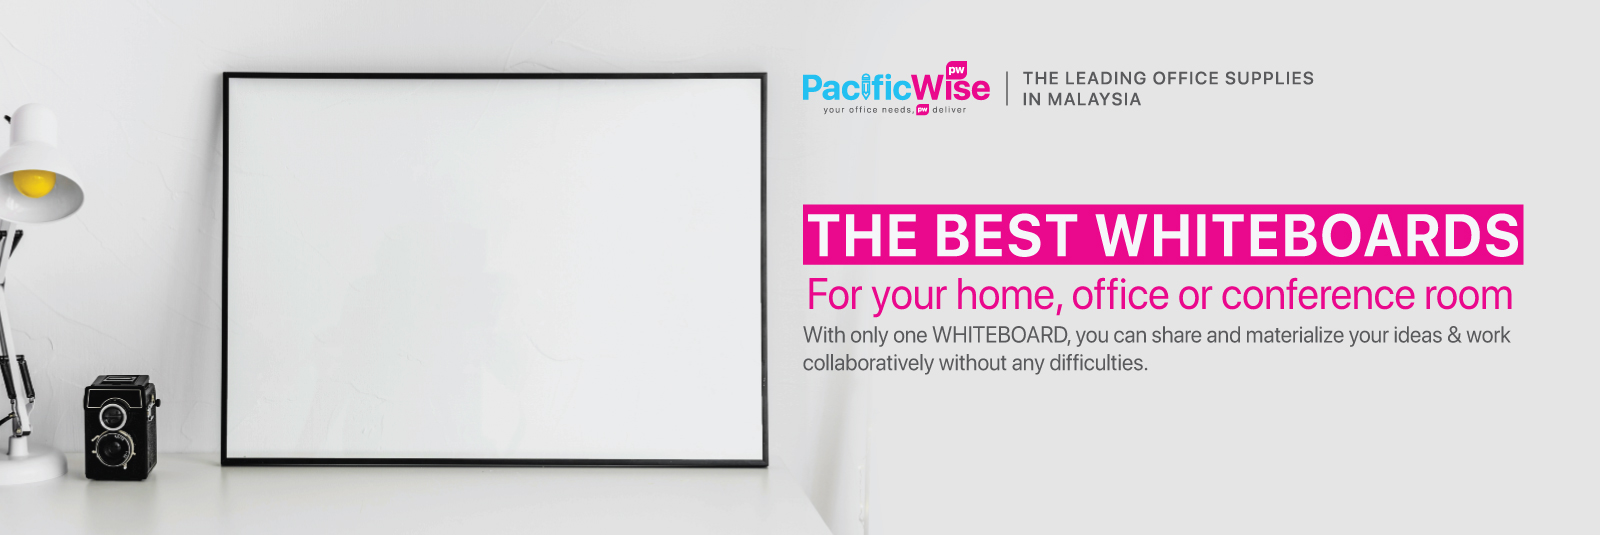 THE BEST WHITEBOARDS FOR YOUR HOME, OFFICE OR CONFERENCE ROOM - with only one whiteboard, you can share and materialize your ideas & work collaboratively without any difficulties.